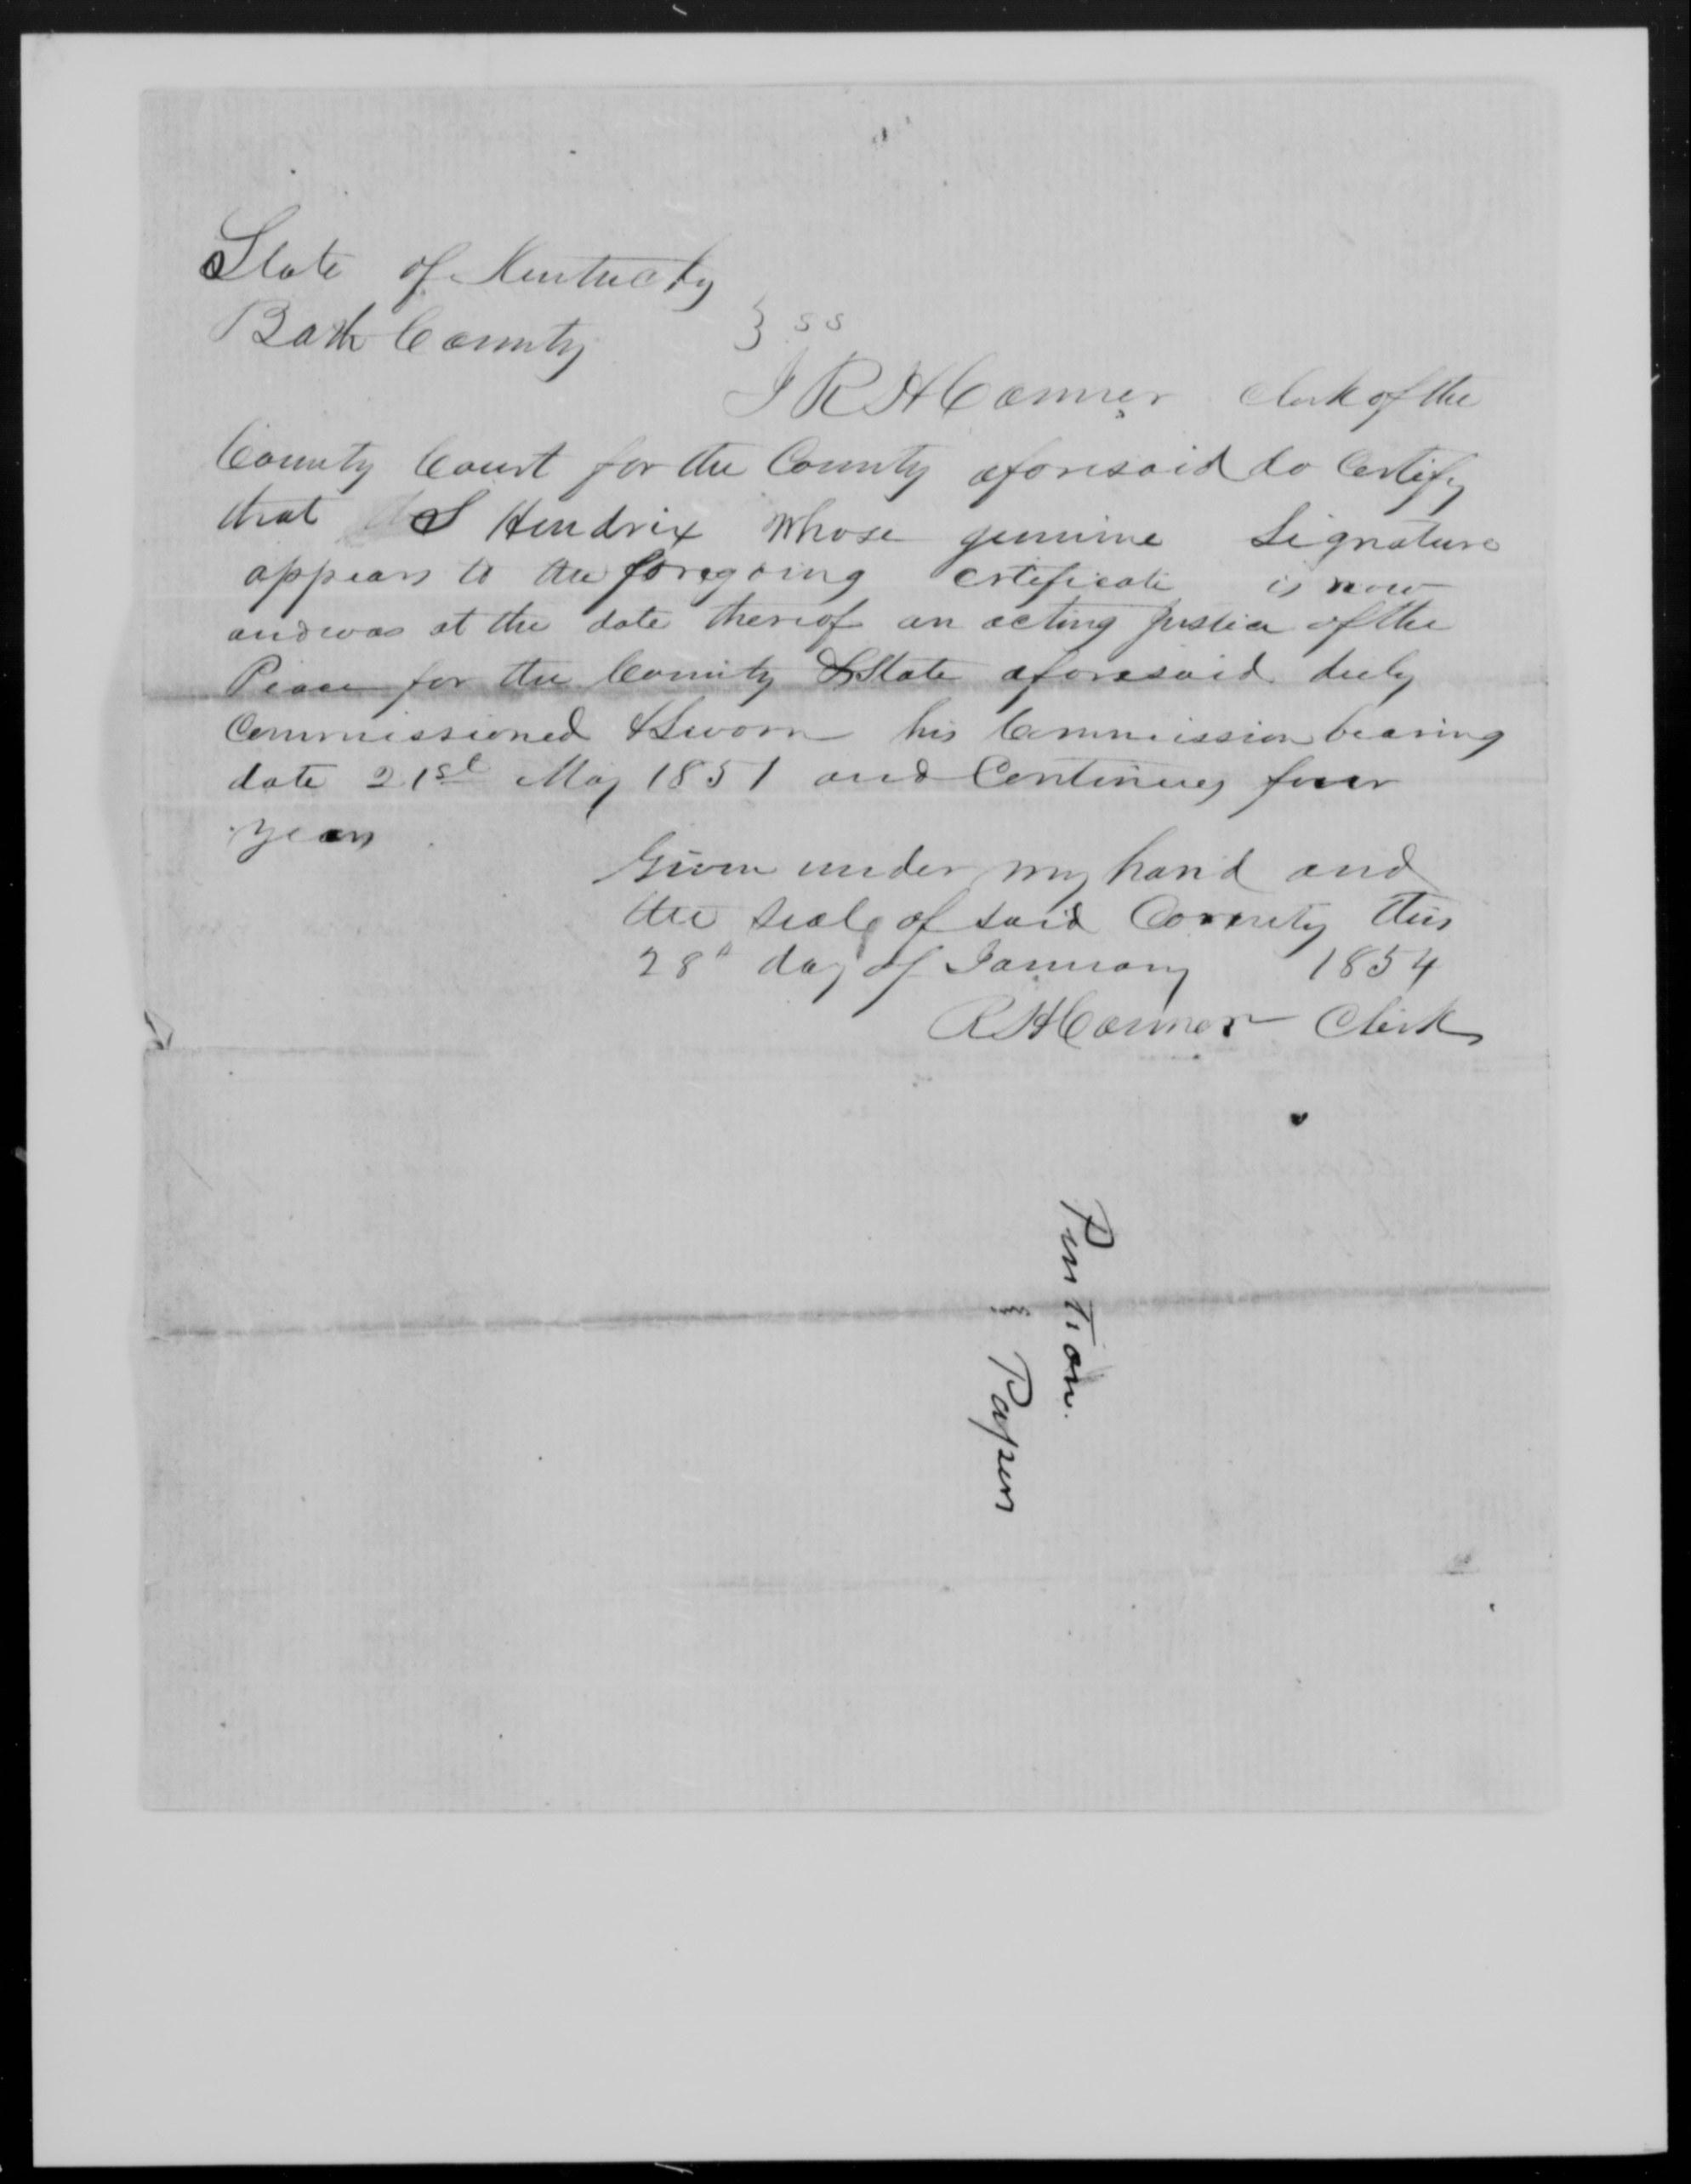 Affidavit of Nancy Boyd in support of a Pension Claim for Mary Yarborough, 24 January 1854, page 4